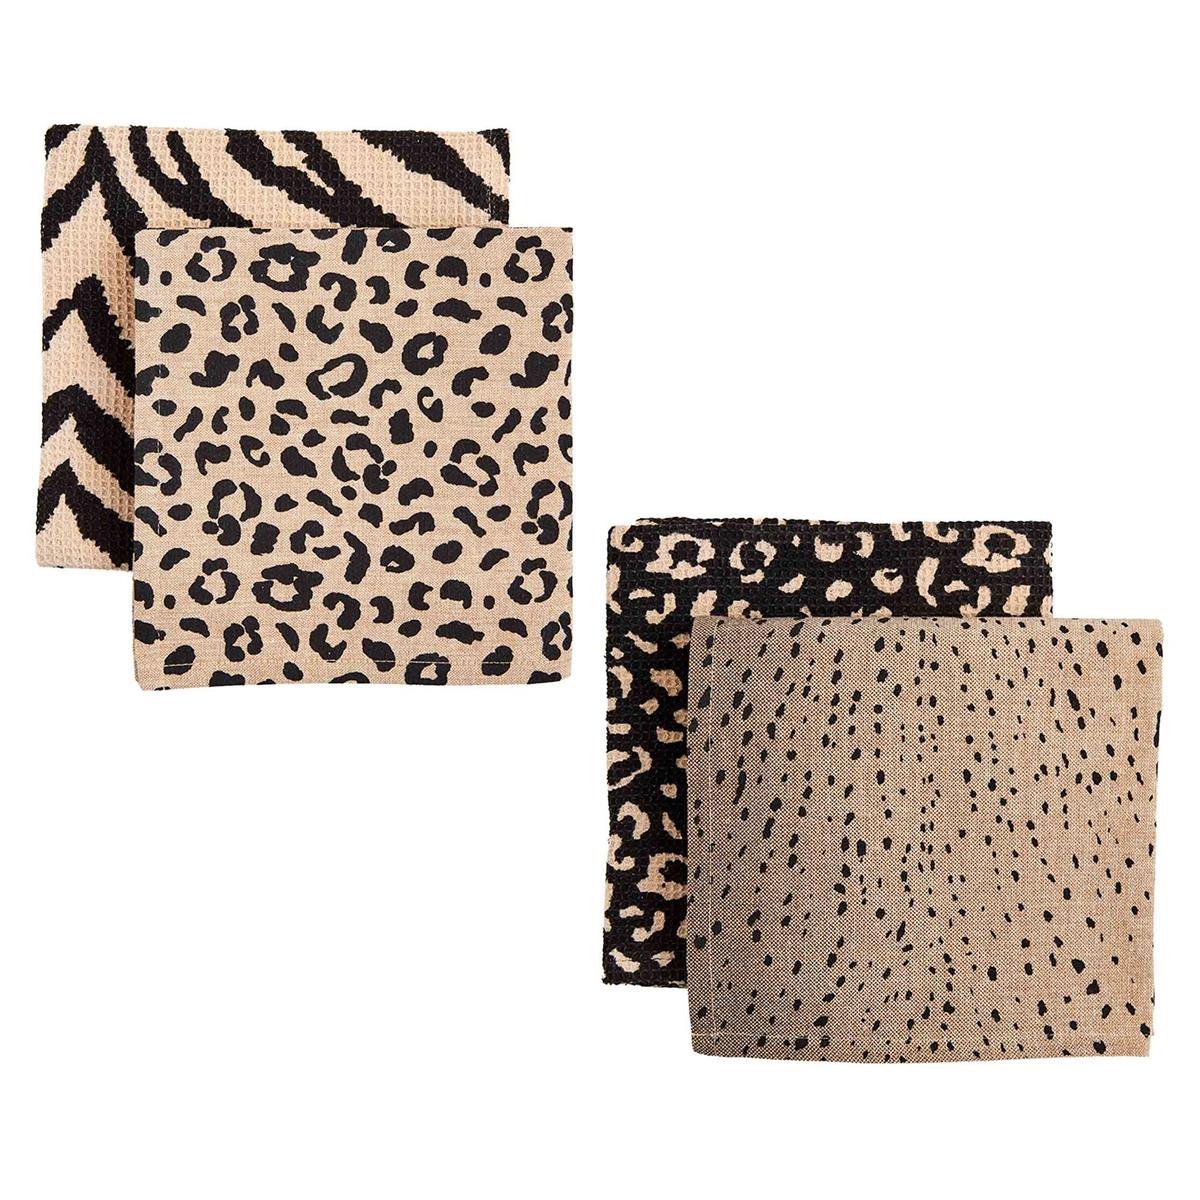 both set of animal print towels displayed on a white background